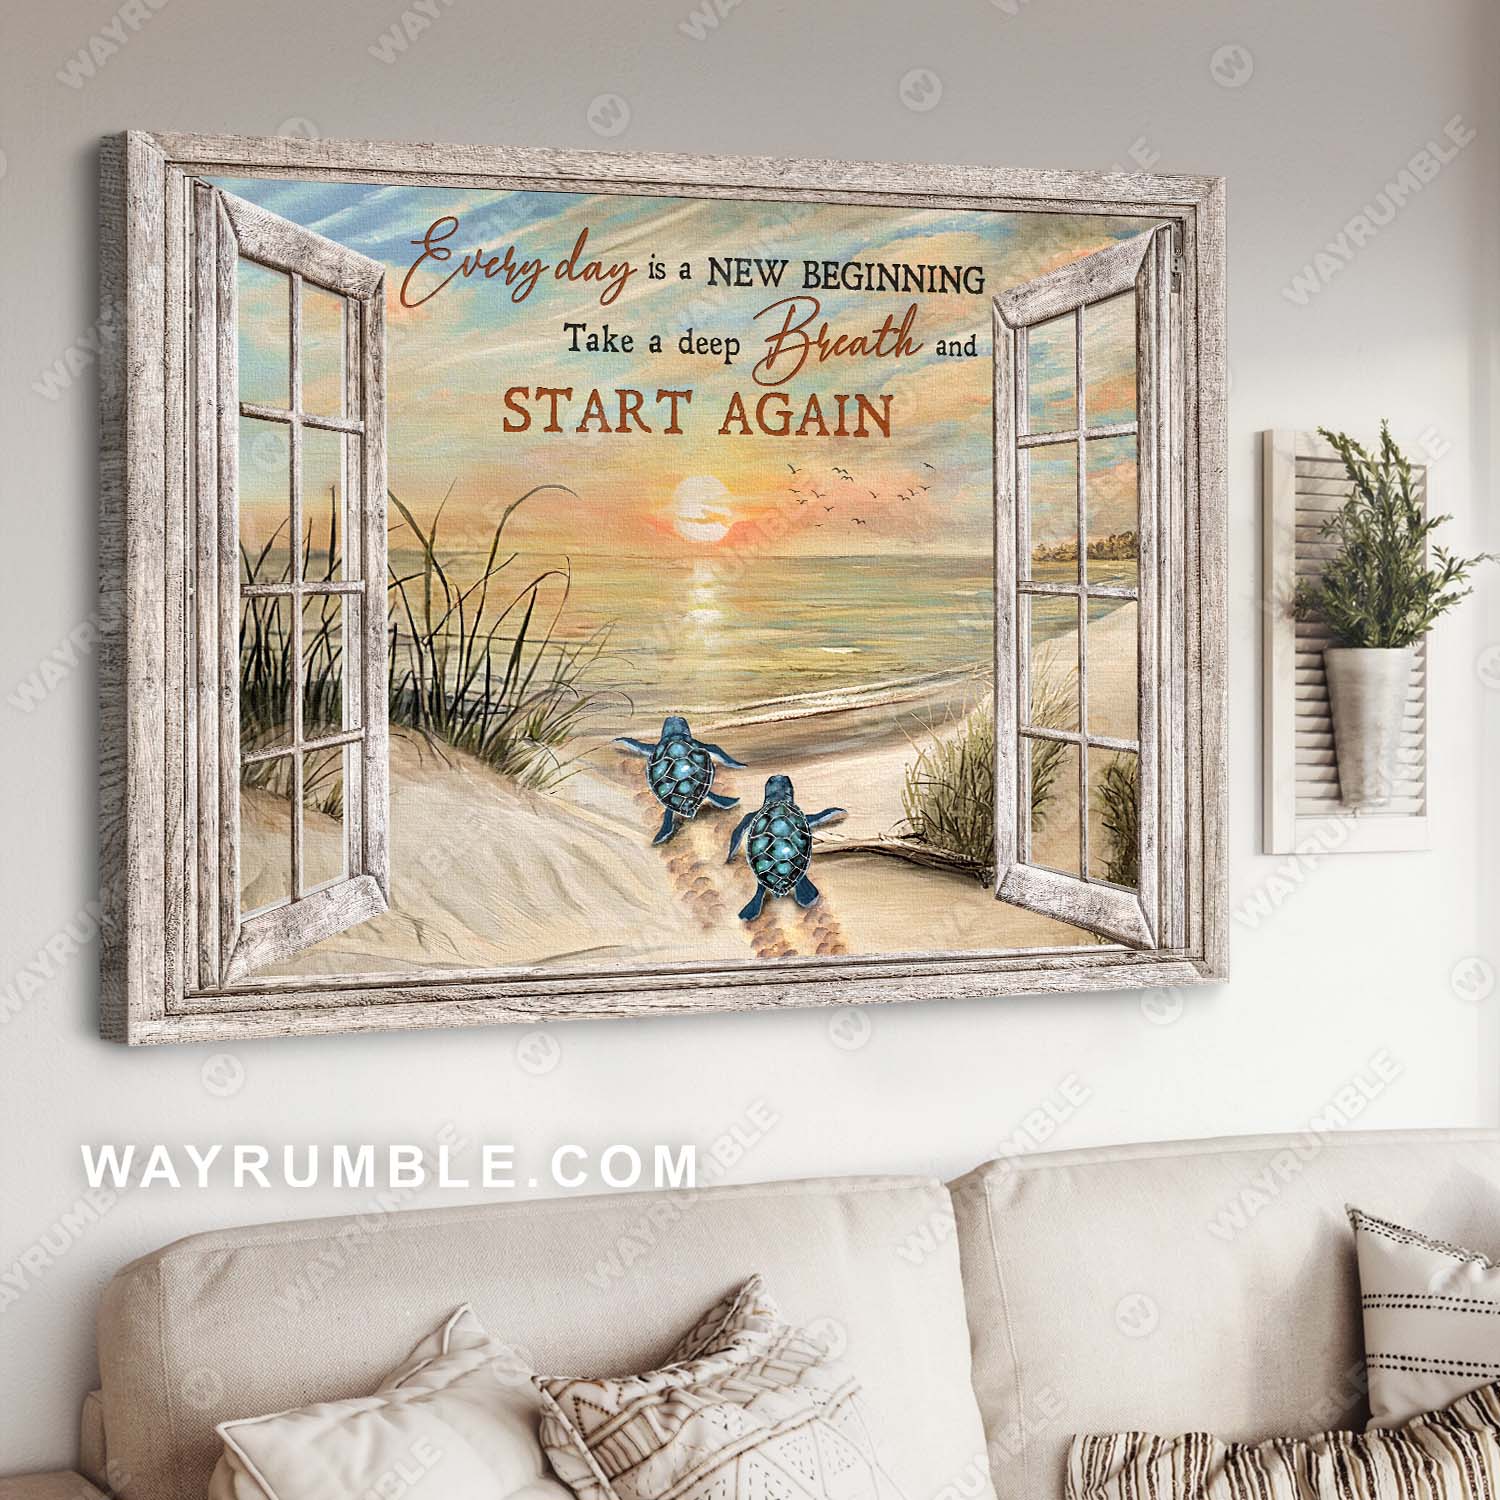 Sea Turtle, Sunrise on the beach, Every day is a new beginning - Jesu Landscape Canvas Prints, Wall Art